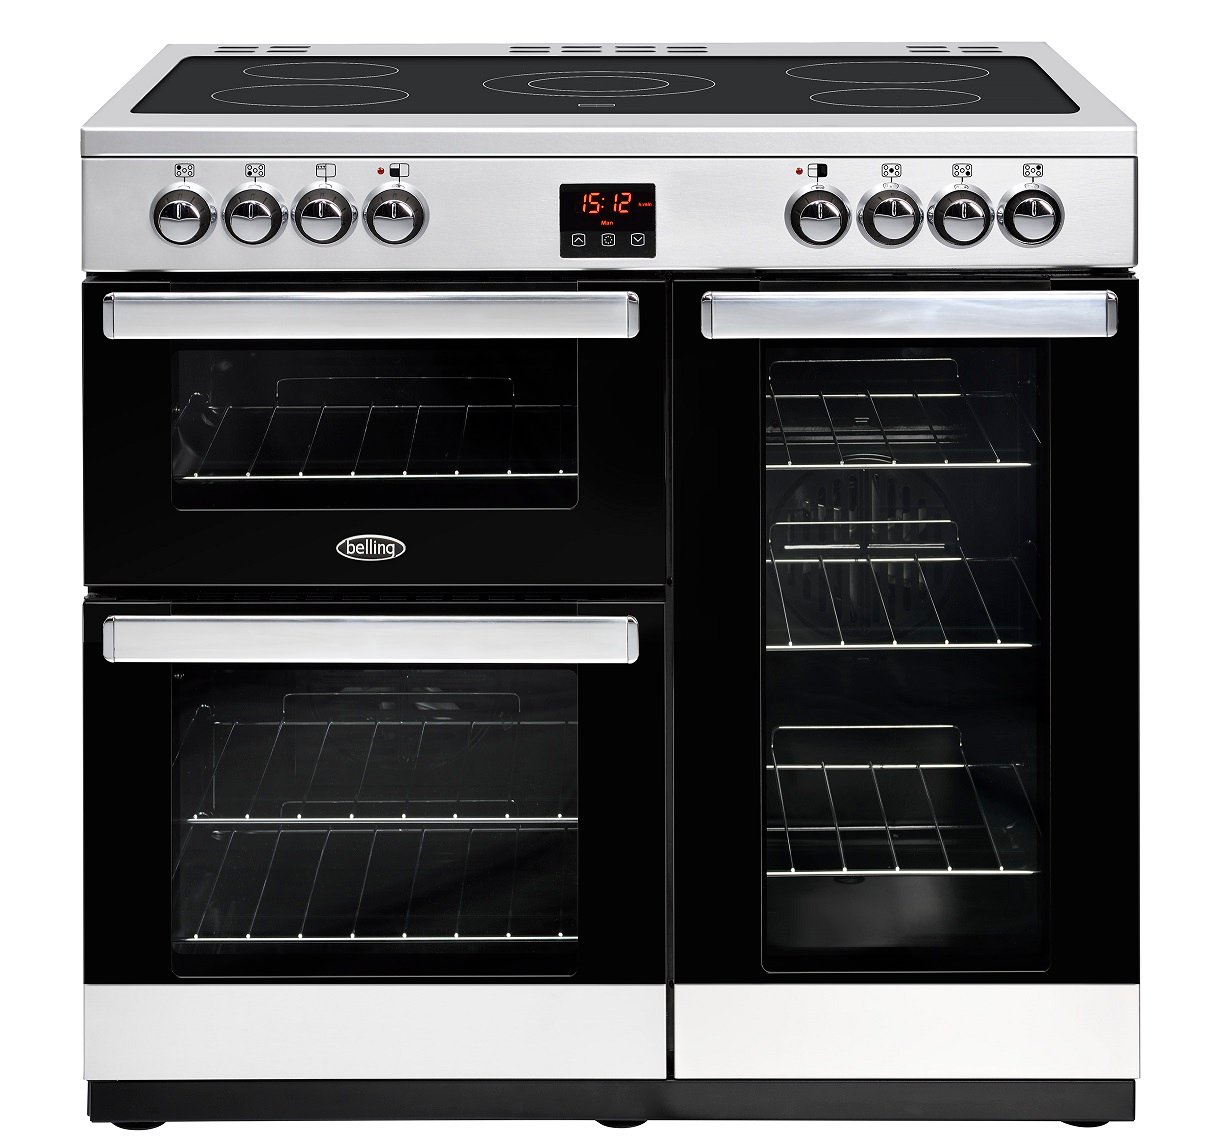 90cm electric range cooker with 5 zone ceramic hotplate, Maxi-Clock, market leading tall oven and easy clean enamel.